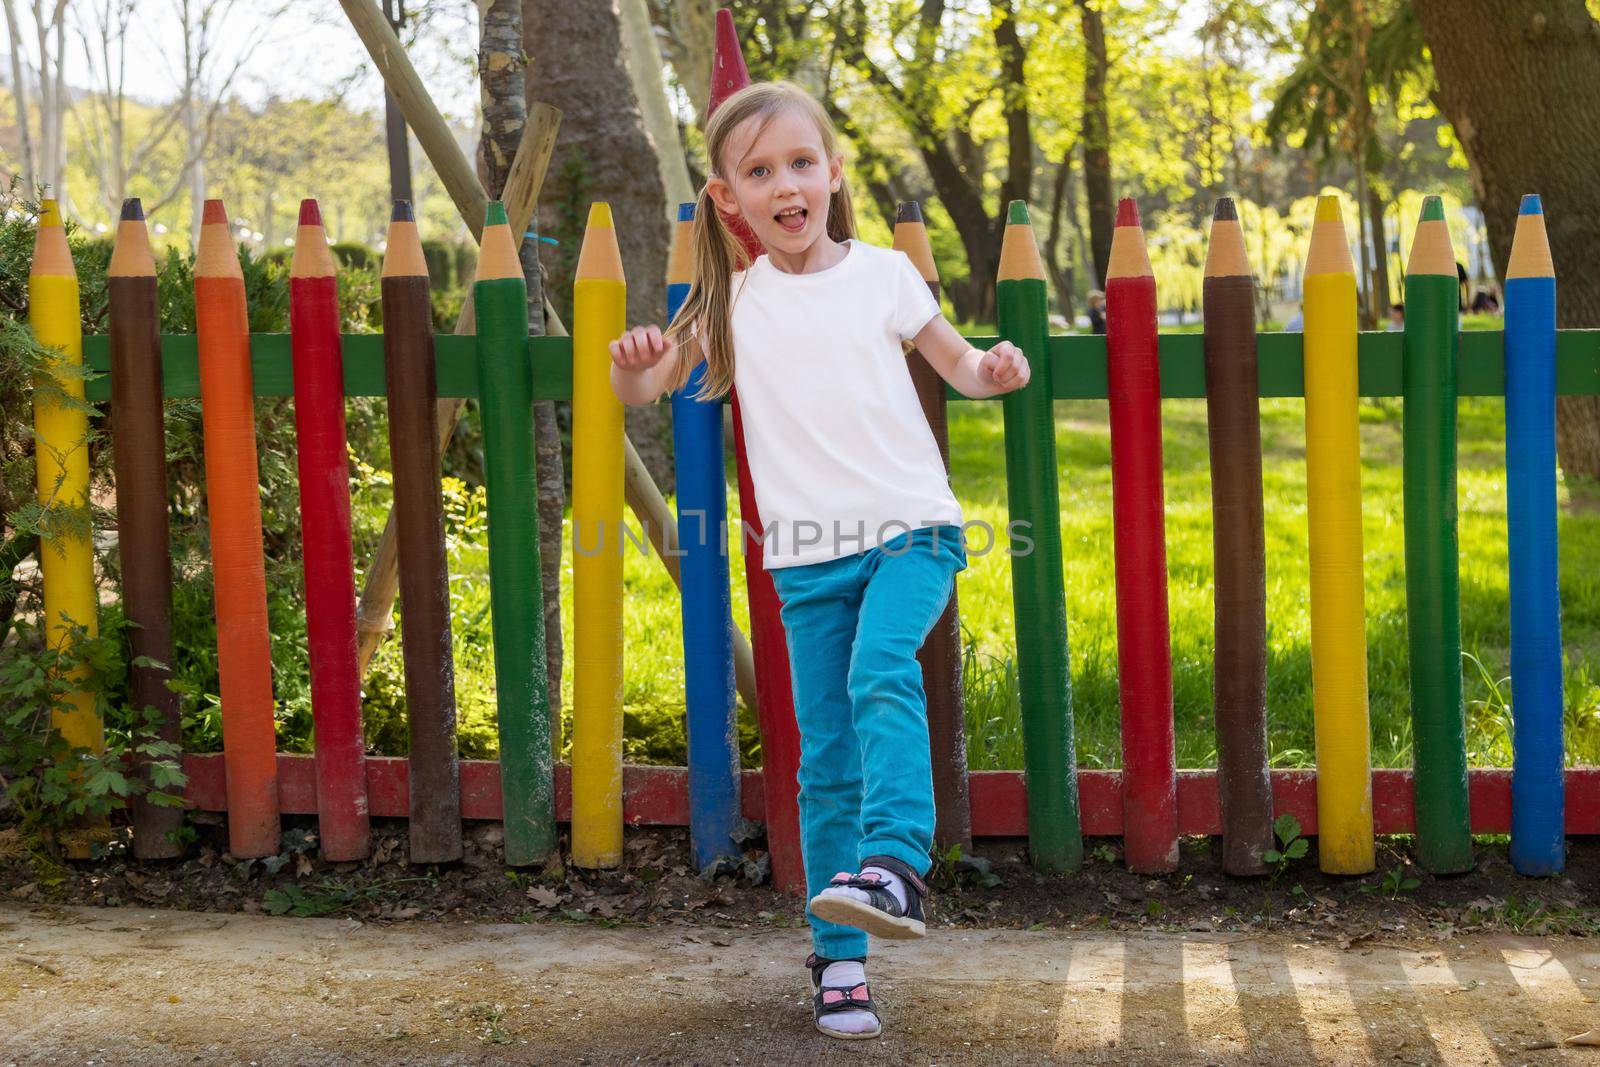 Mock-up of children's summer clothes, sportswear, uniforms. Little girl in a white t-shirt with space for an image or logo. park or outside. Children's bright background, on a school theme.